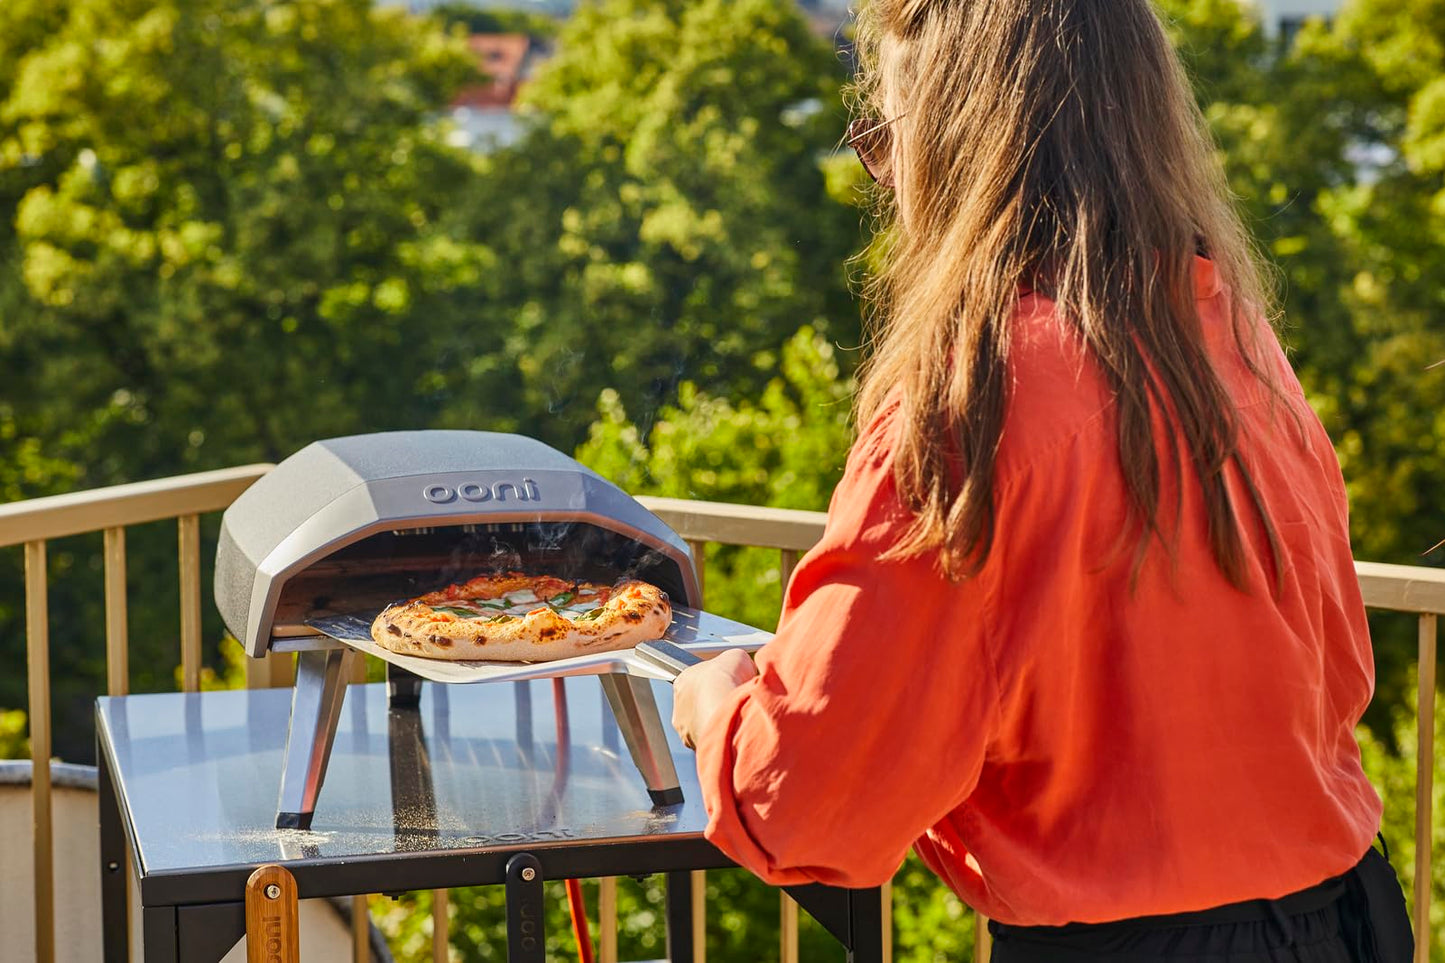 Ooni Koda 12 Gas Pizza Oven – 28mbar Propane Outdoor Pizza Oven, Portable Pizza Oven For Fire and Stonebaked 12 Inch Pizzas, With Gas Hose & Regulator, Countertop Pizza Maker, Outdoor Pizza Cooker